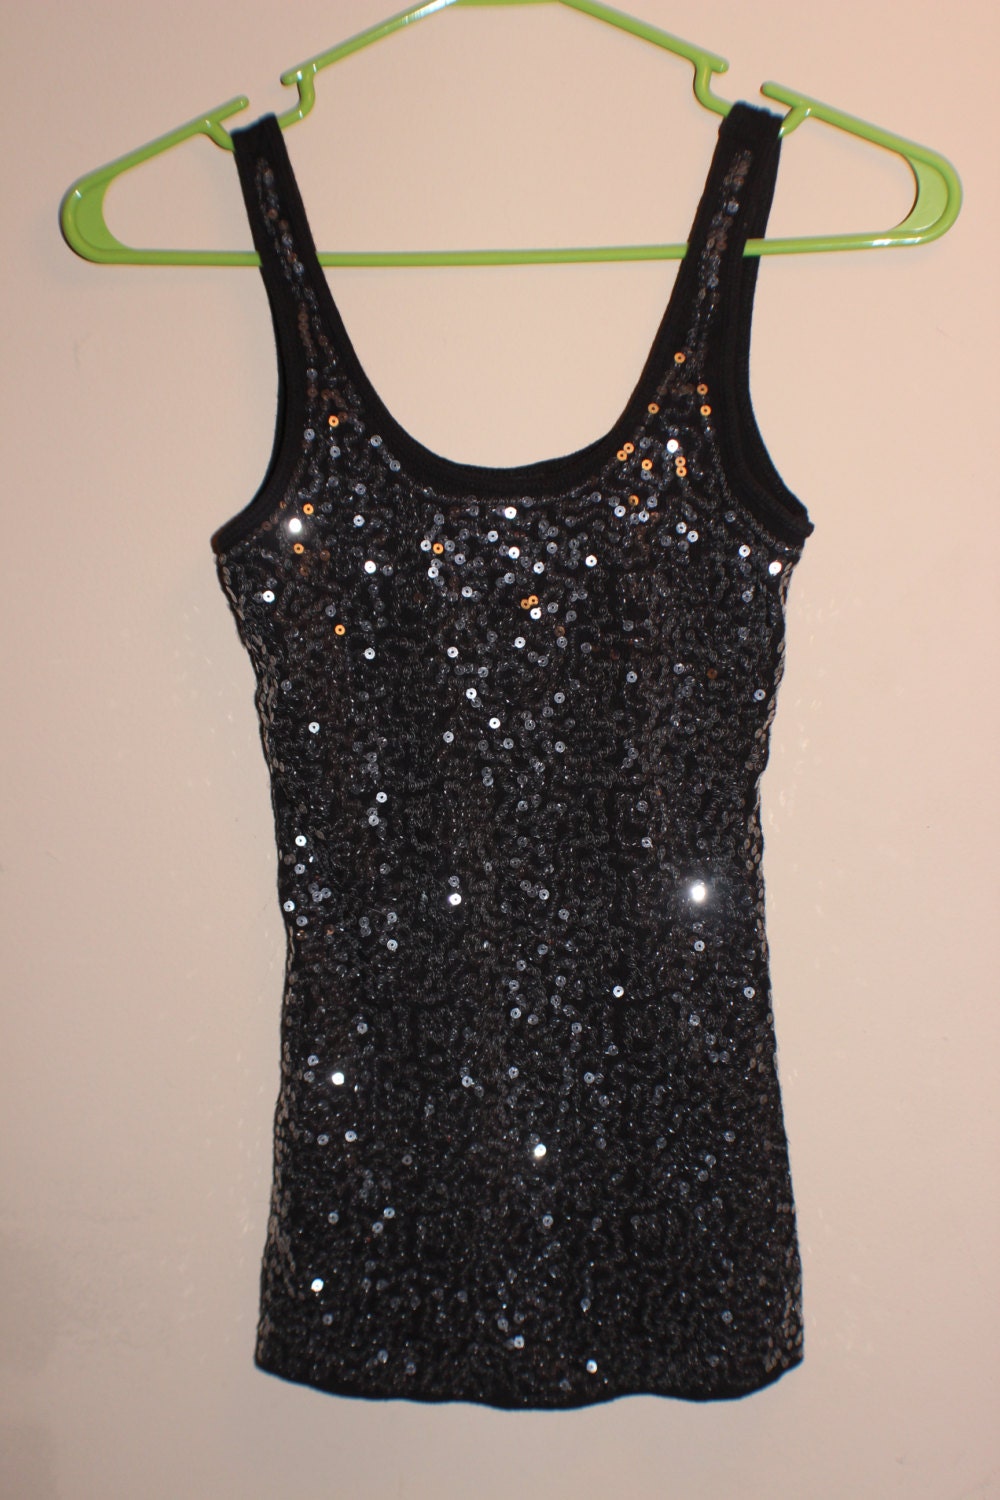 Sparkly Black Tank Top glitter sequin stretchy stretch Tee